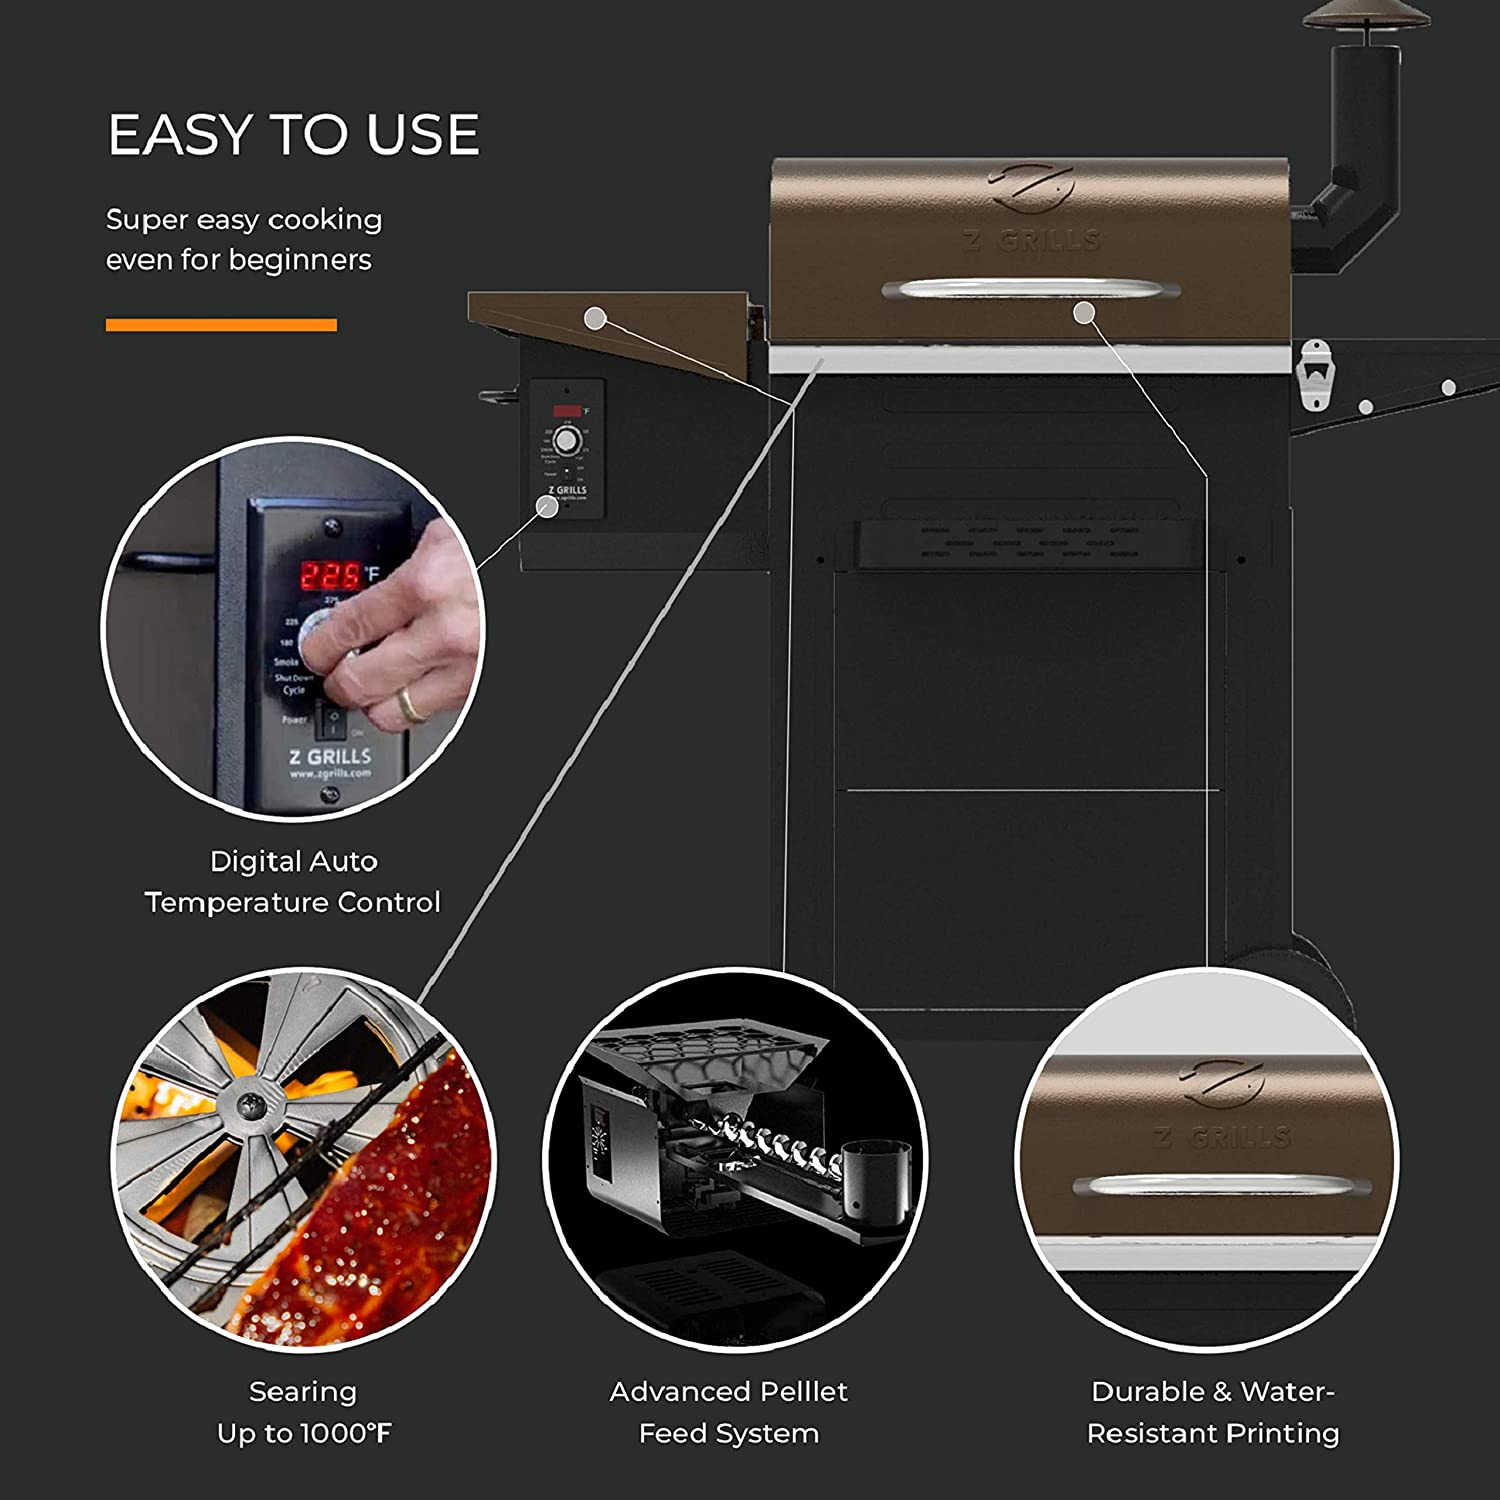 Z GRILLS L6002B Smart Wood Pellet Grill 6 in 1 Outdoor BBQ Smoker 573 SQ Inches Cooking Area Barbecue Grill Bronze - image 4 of 12